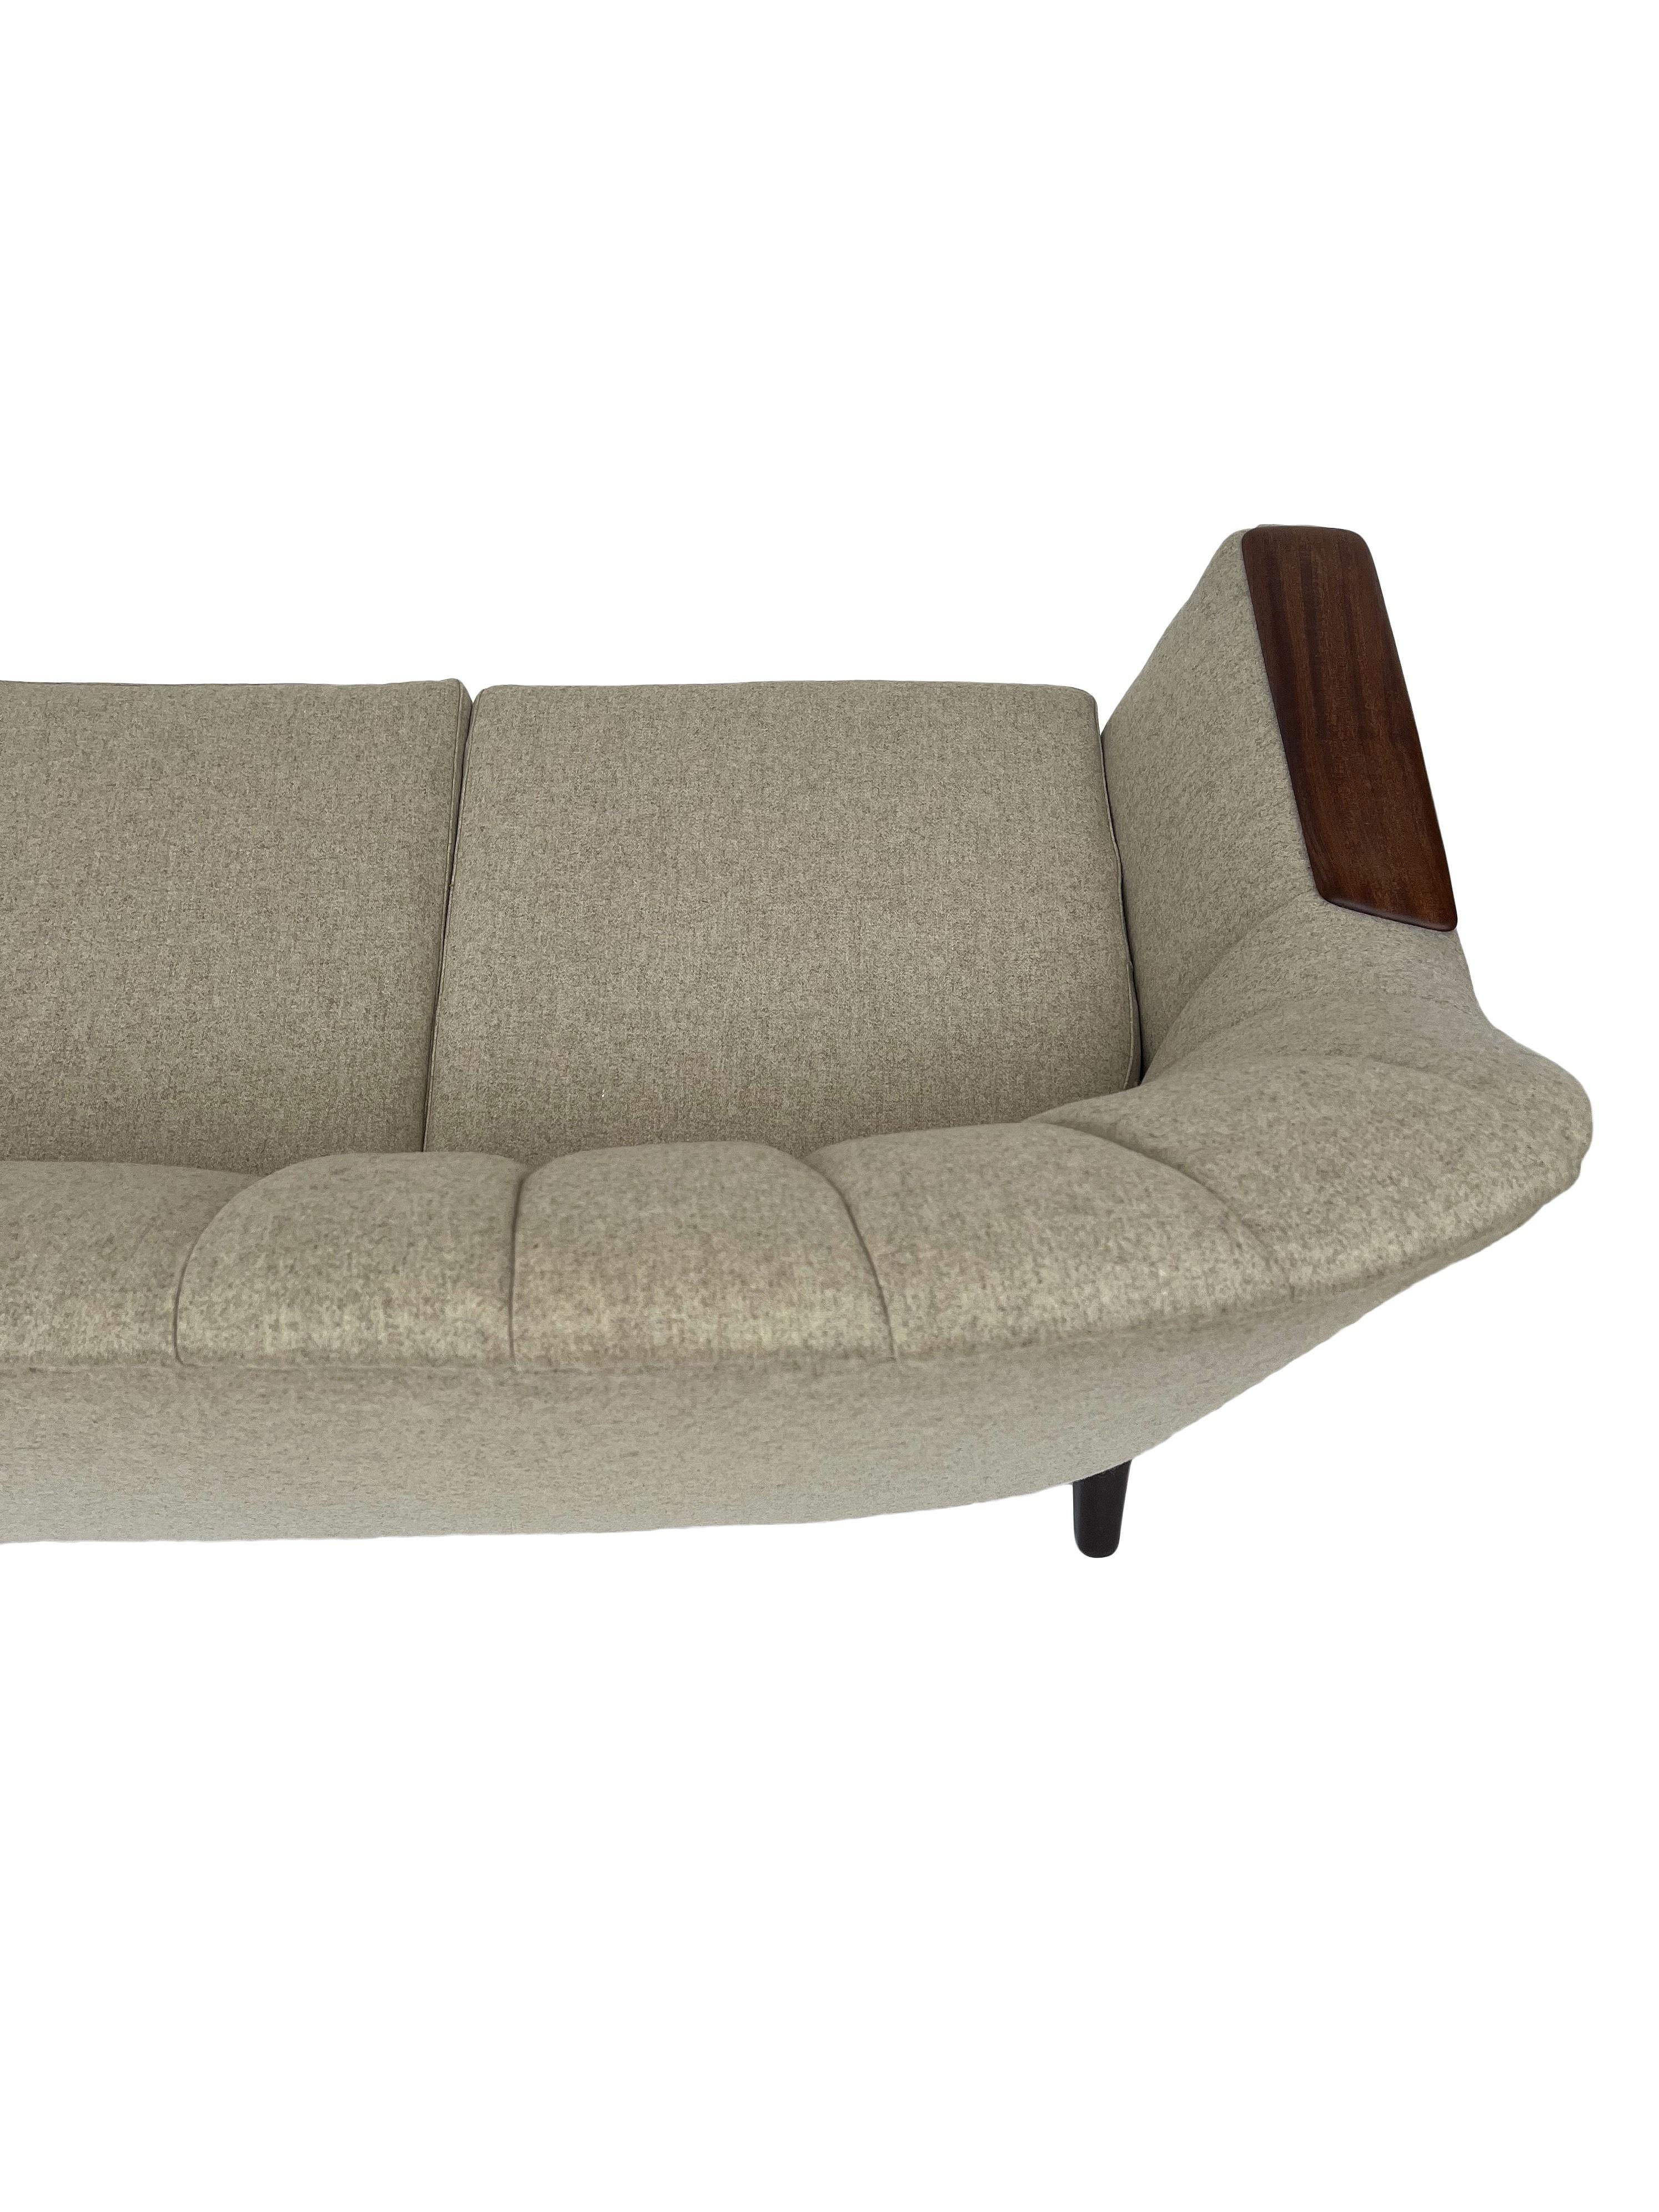 Danish Scalloped Cream Wool and Teak 3 Seater Sofa Midcentury, 1950s In Excellent Condition For Sale In London, GB